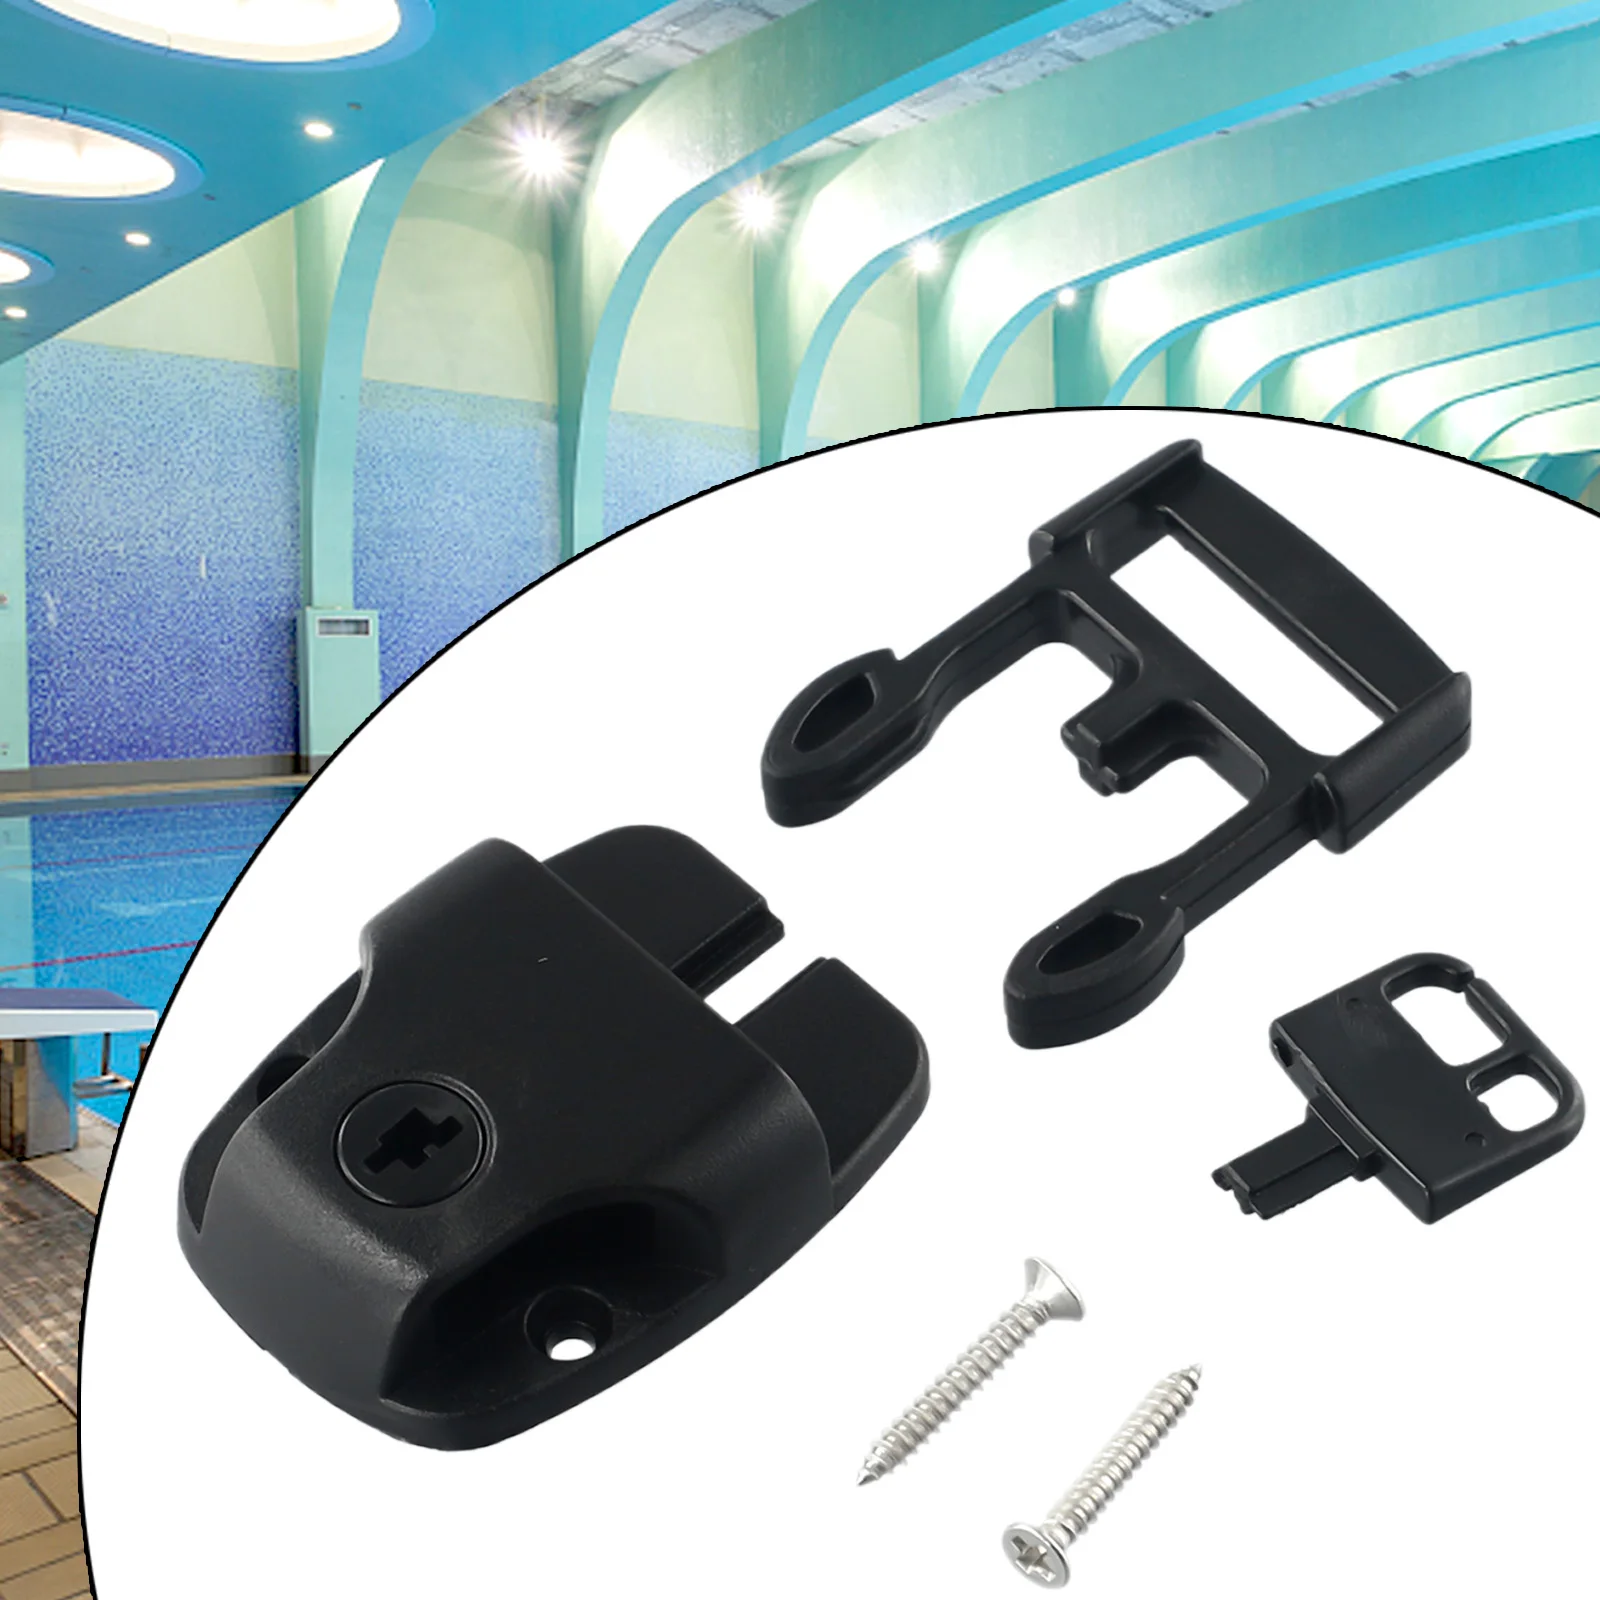 

Durable Hot Tub Latch Accessories Useful New Spa Superior Buckle Clip With Key Clip Lock Excellent Hot Tub Latch